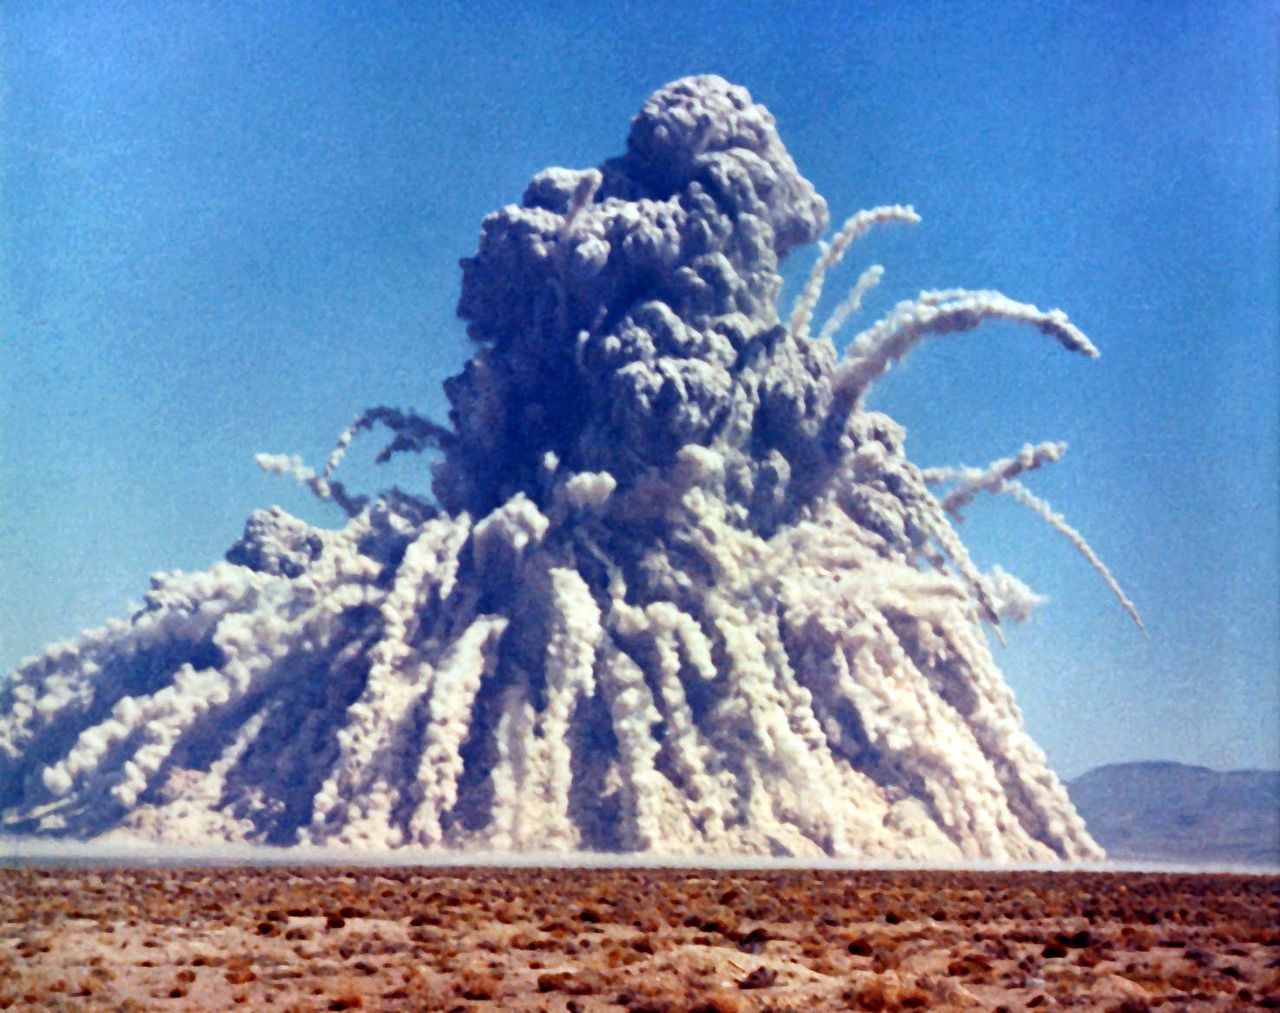 One of the test explosions conducted as part of Operation Plowshare